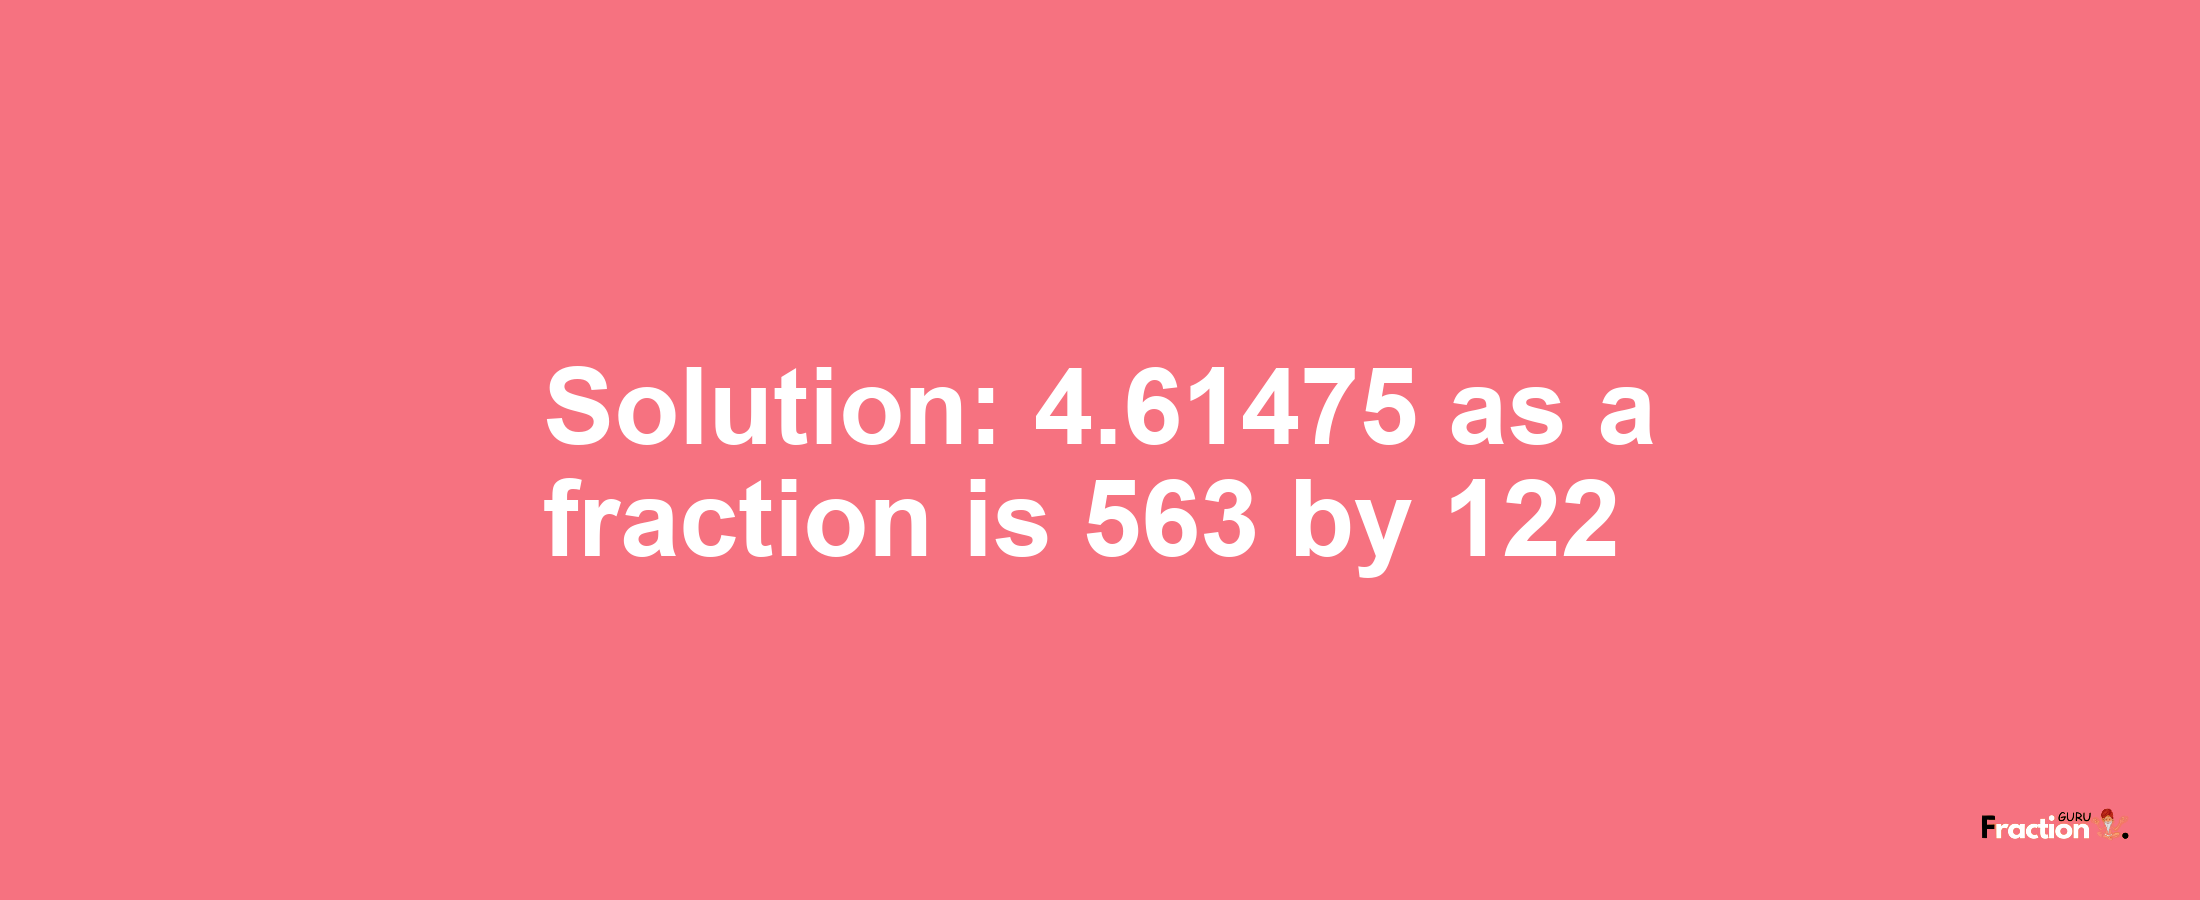 Solution:4.61475 as a fraction is 563/122